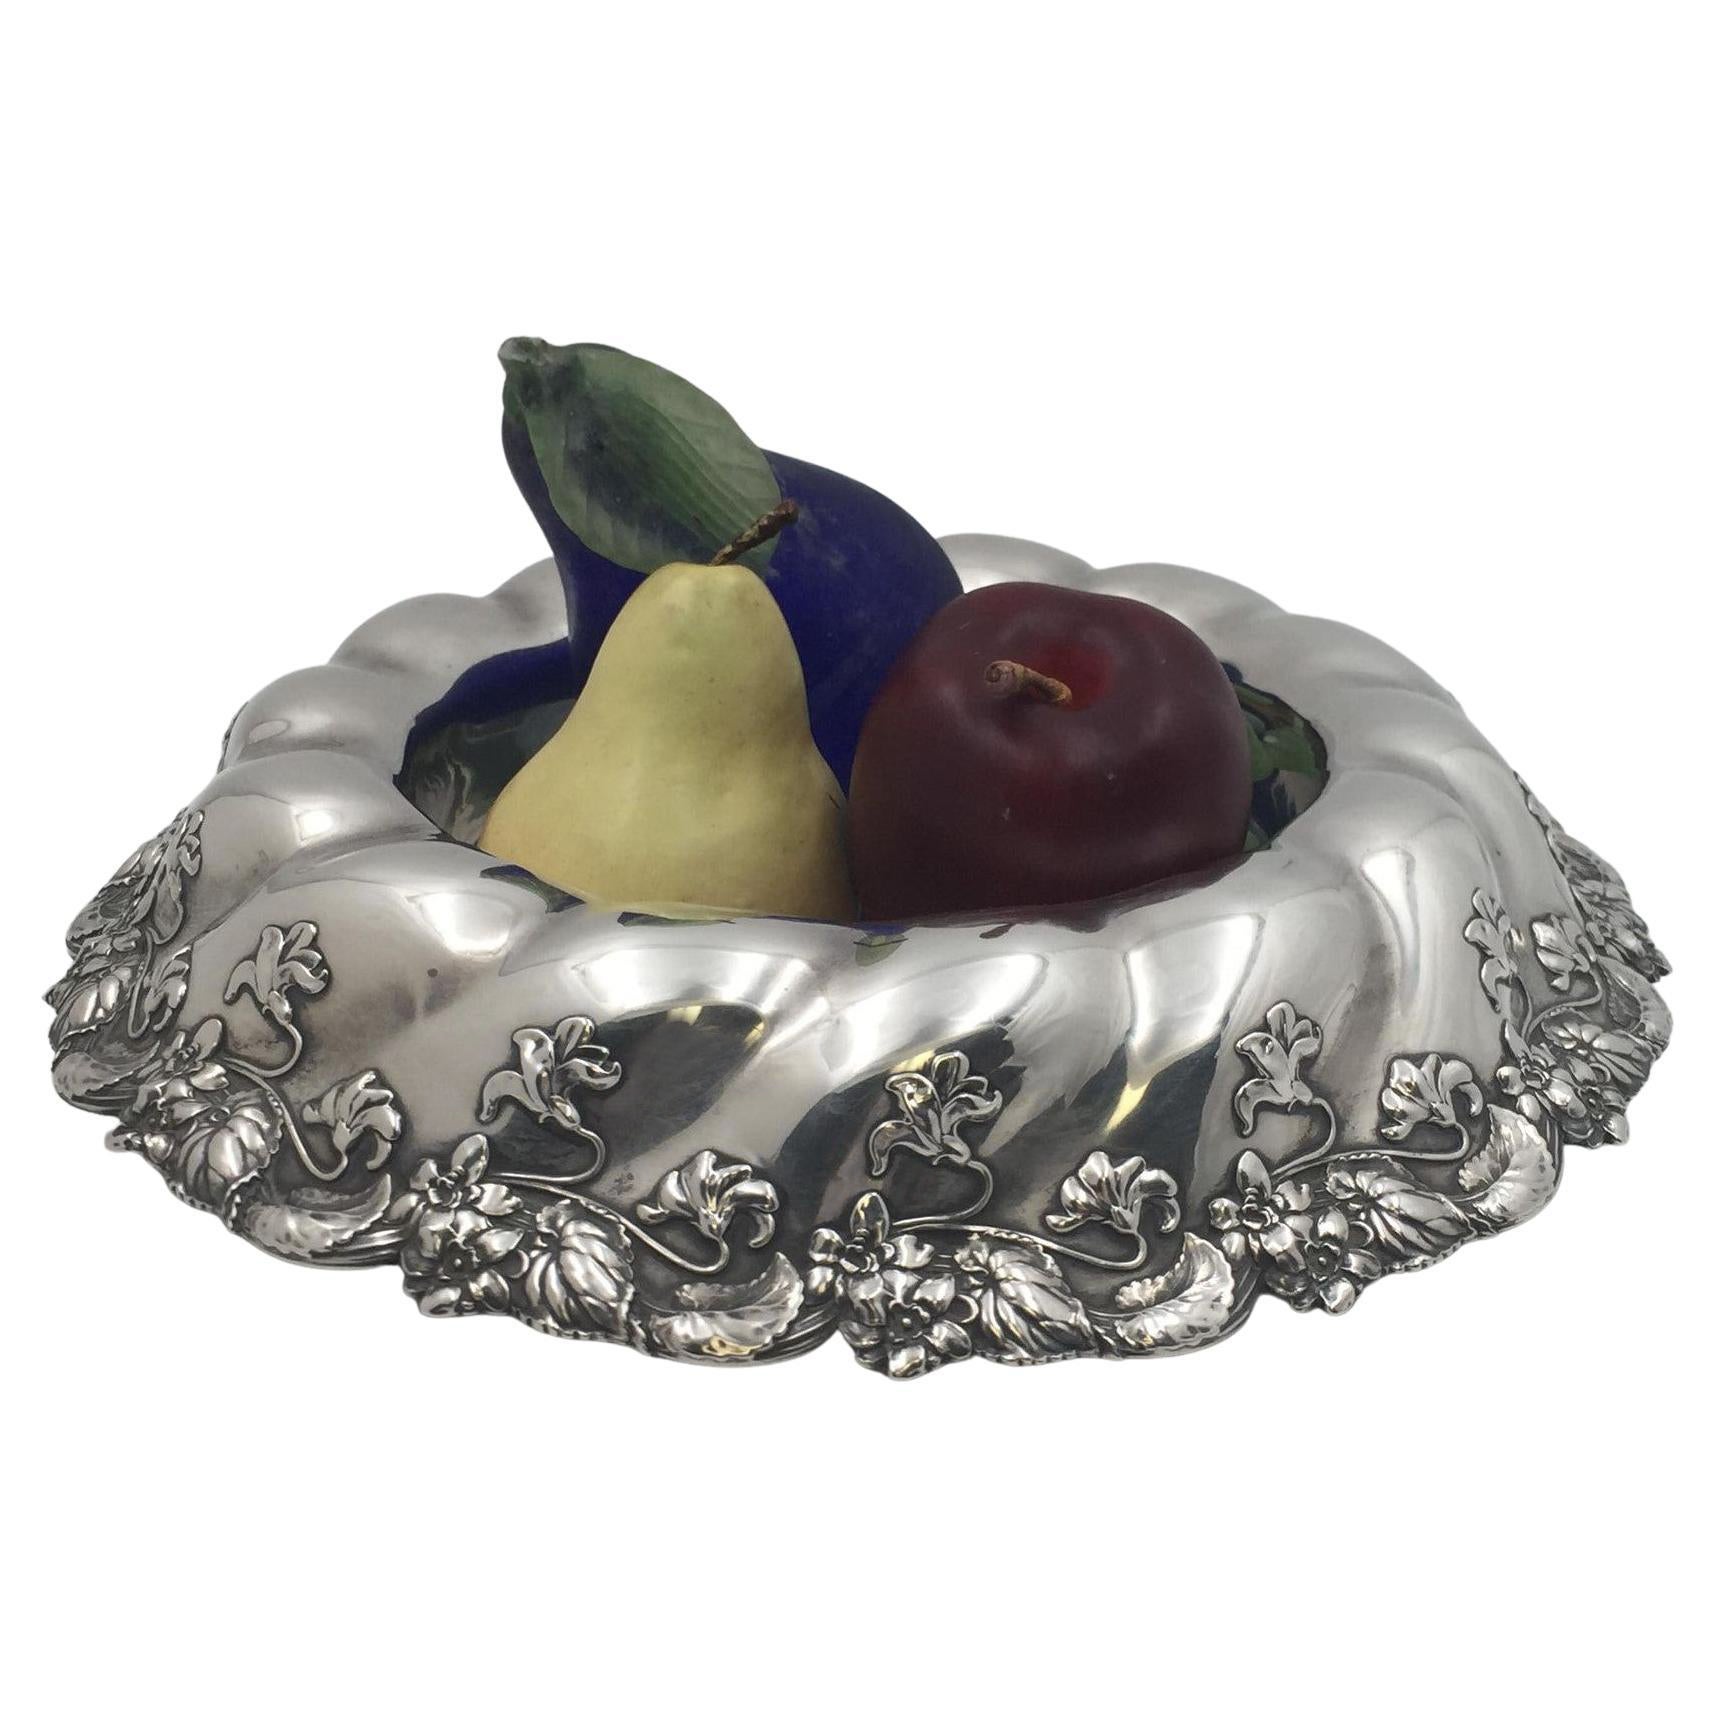 Whiting Sterling Silver 1905 Centerpiece/Fruit Bowl in Art Nouveau Style